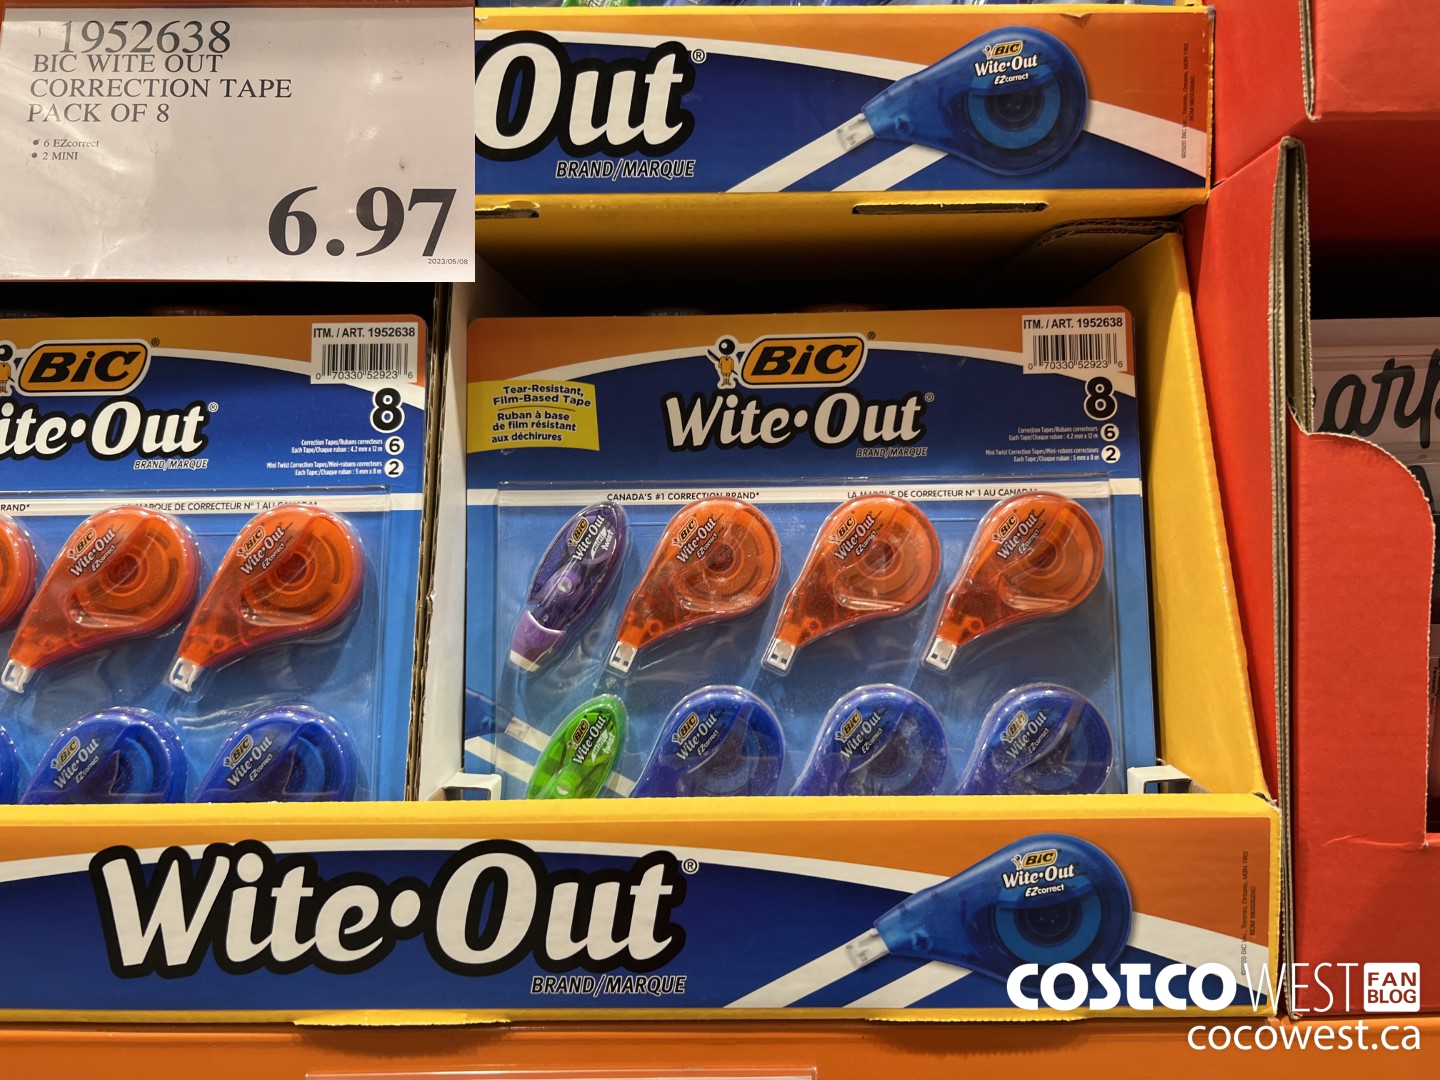 1952638 BIC WITE OUT CORRECTION TAPE 2 00 INSTANT SAVINGS EXPIRES